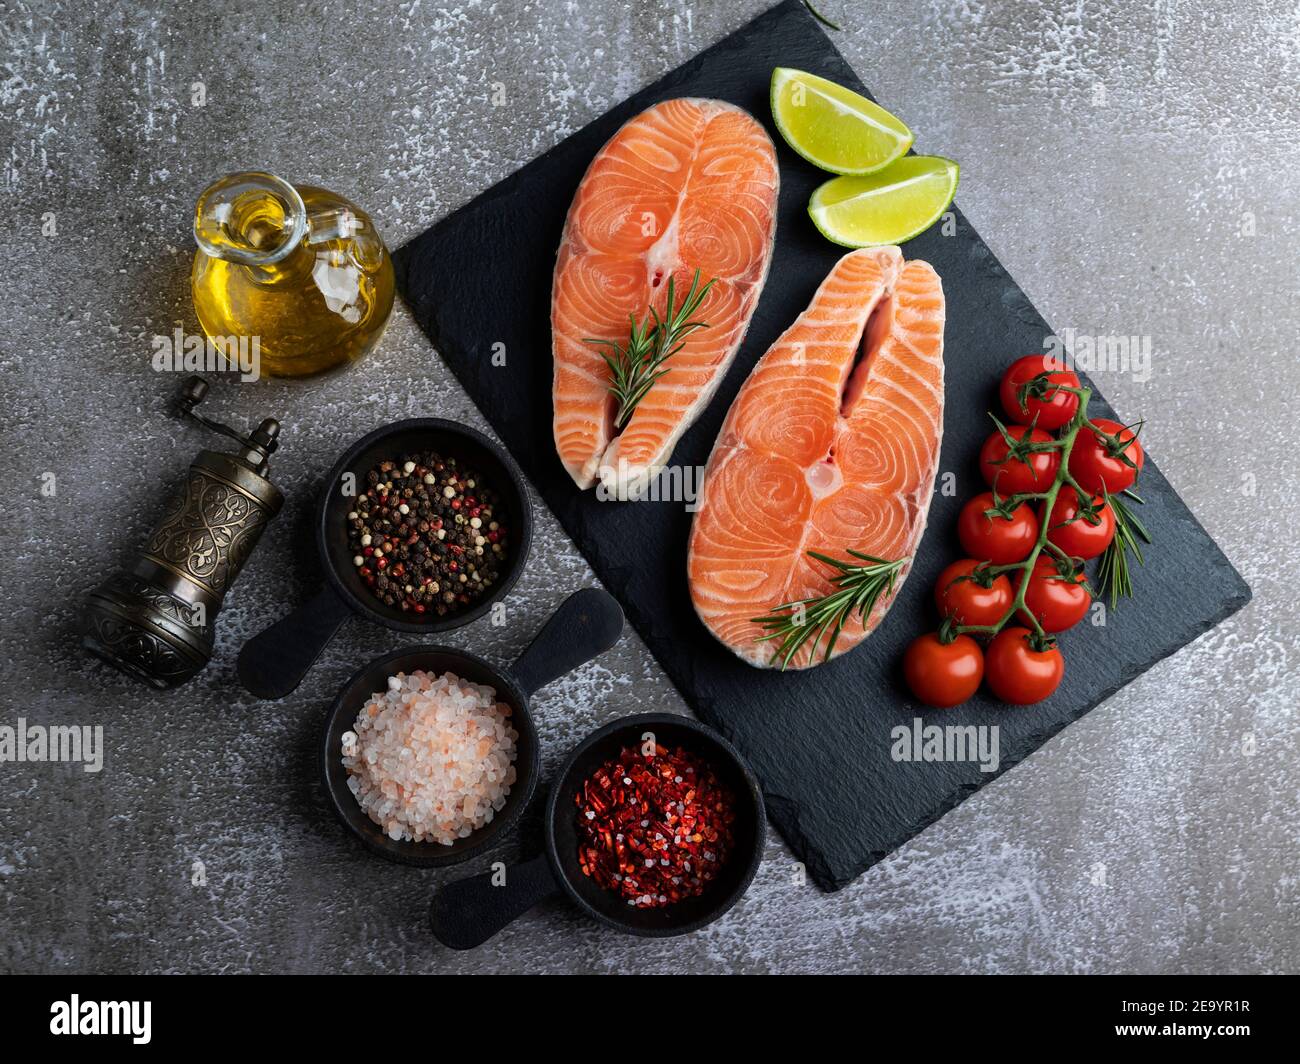 two raw fresh steak fish trout, salmon and spices on black stone surface Stock Photo